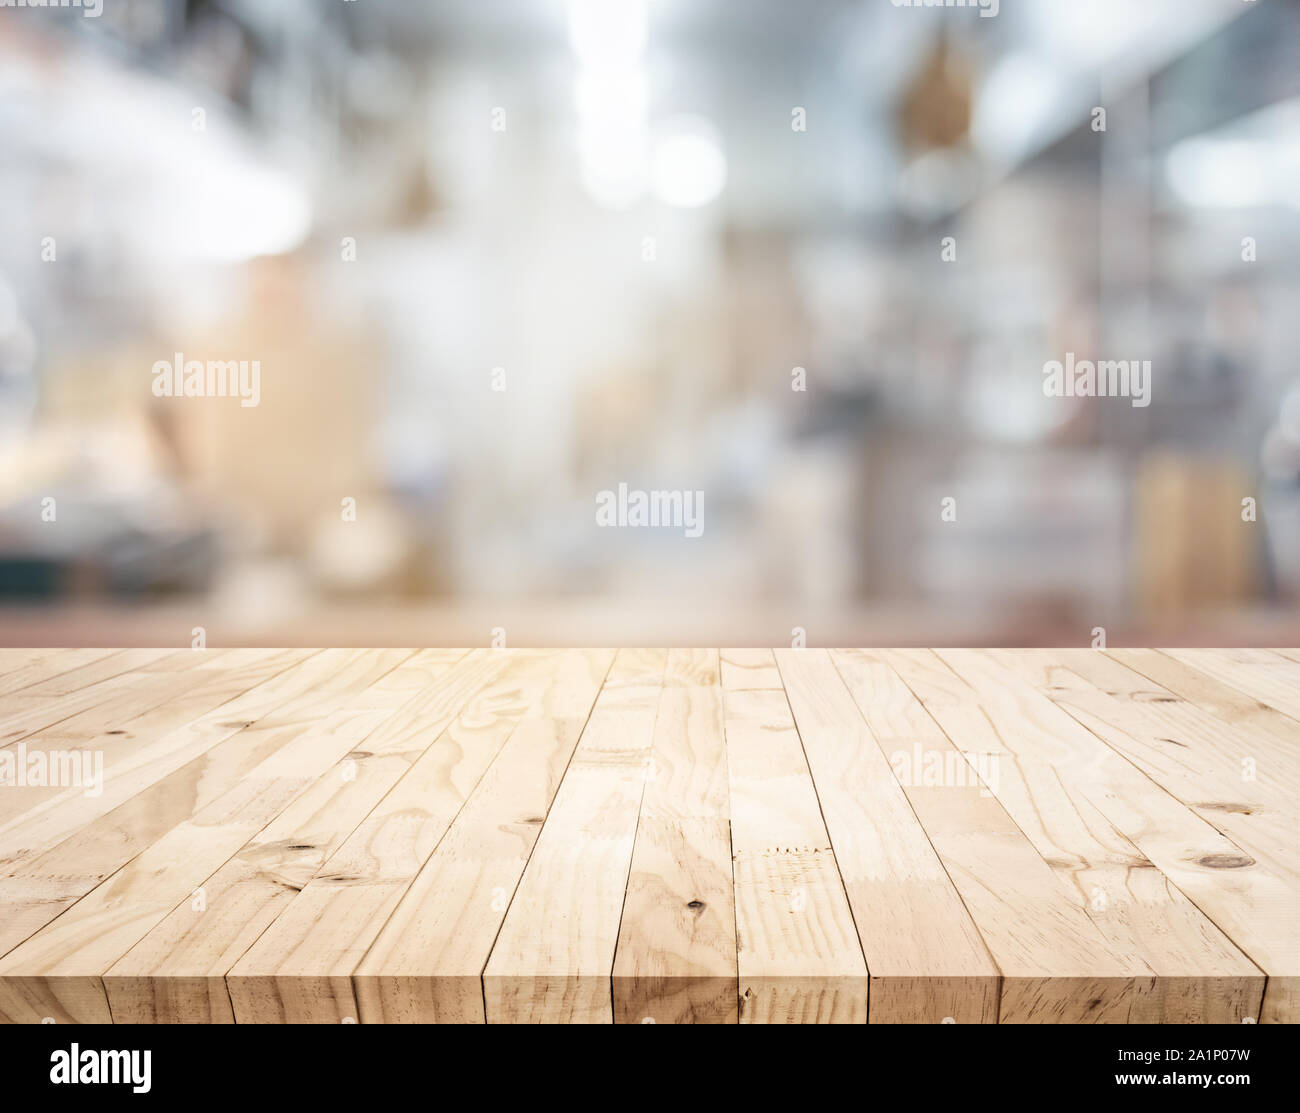 Wood table,counter island on blur kitchen room background.For montage product display or design key visual layout. Stock Photo